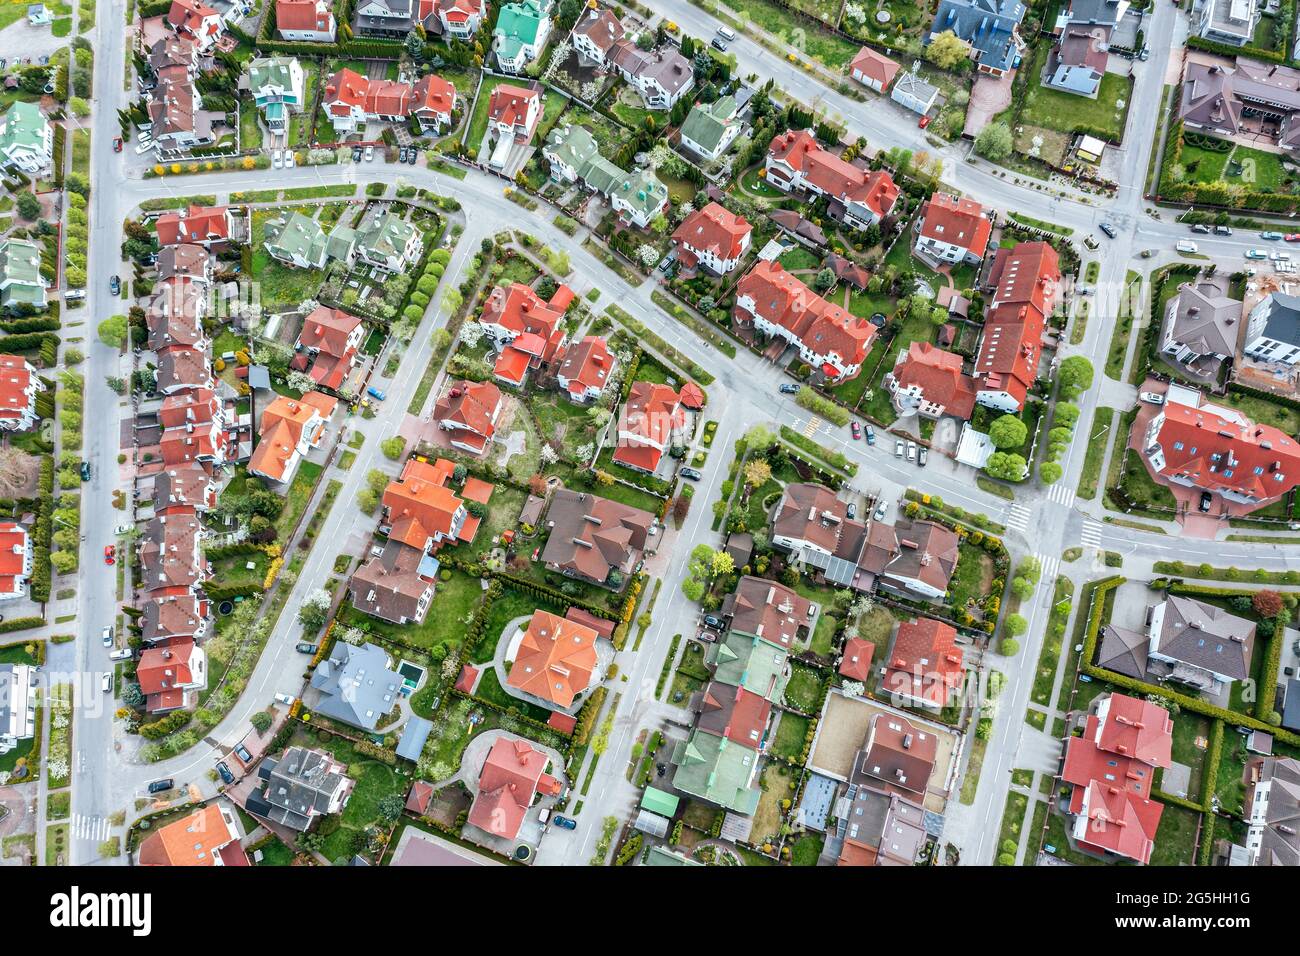 Residential Neighborhood Aerial Hi Res Stock Photography And Images Alamy